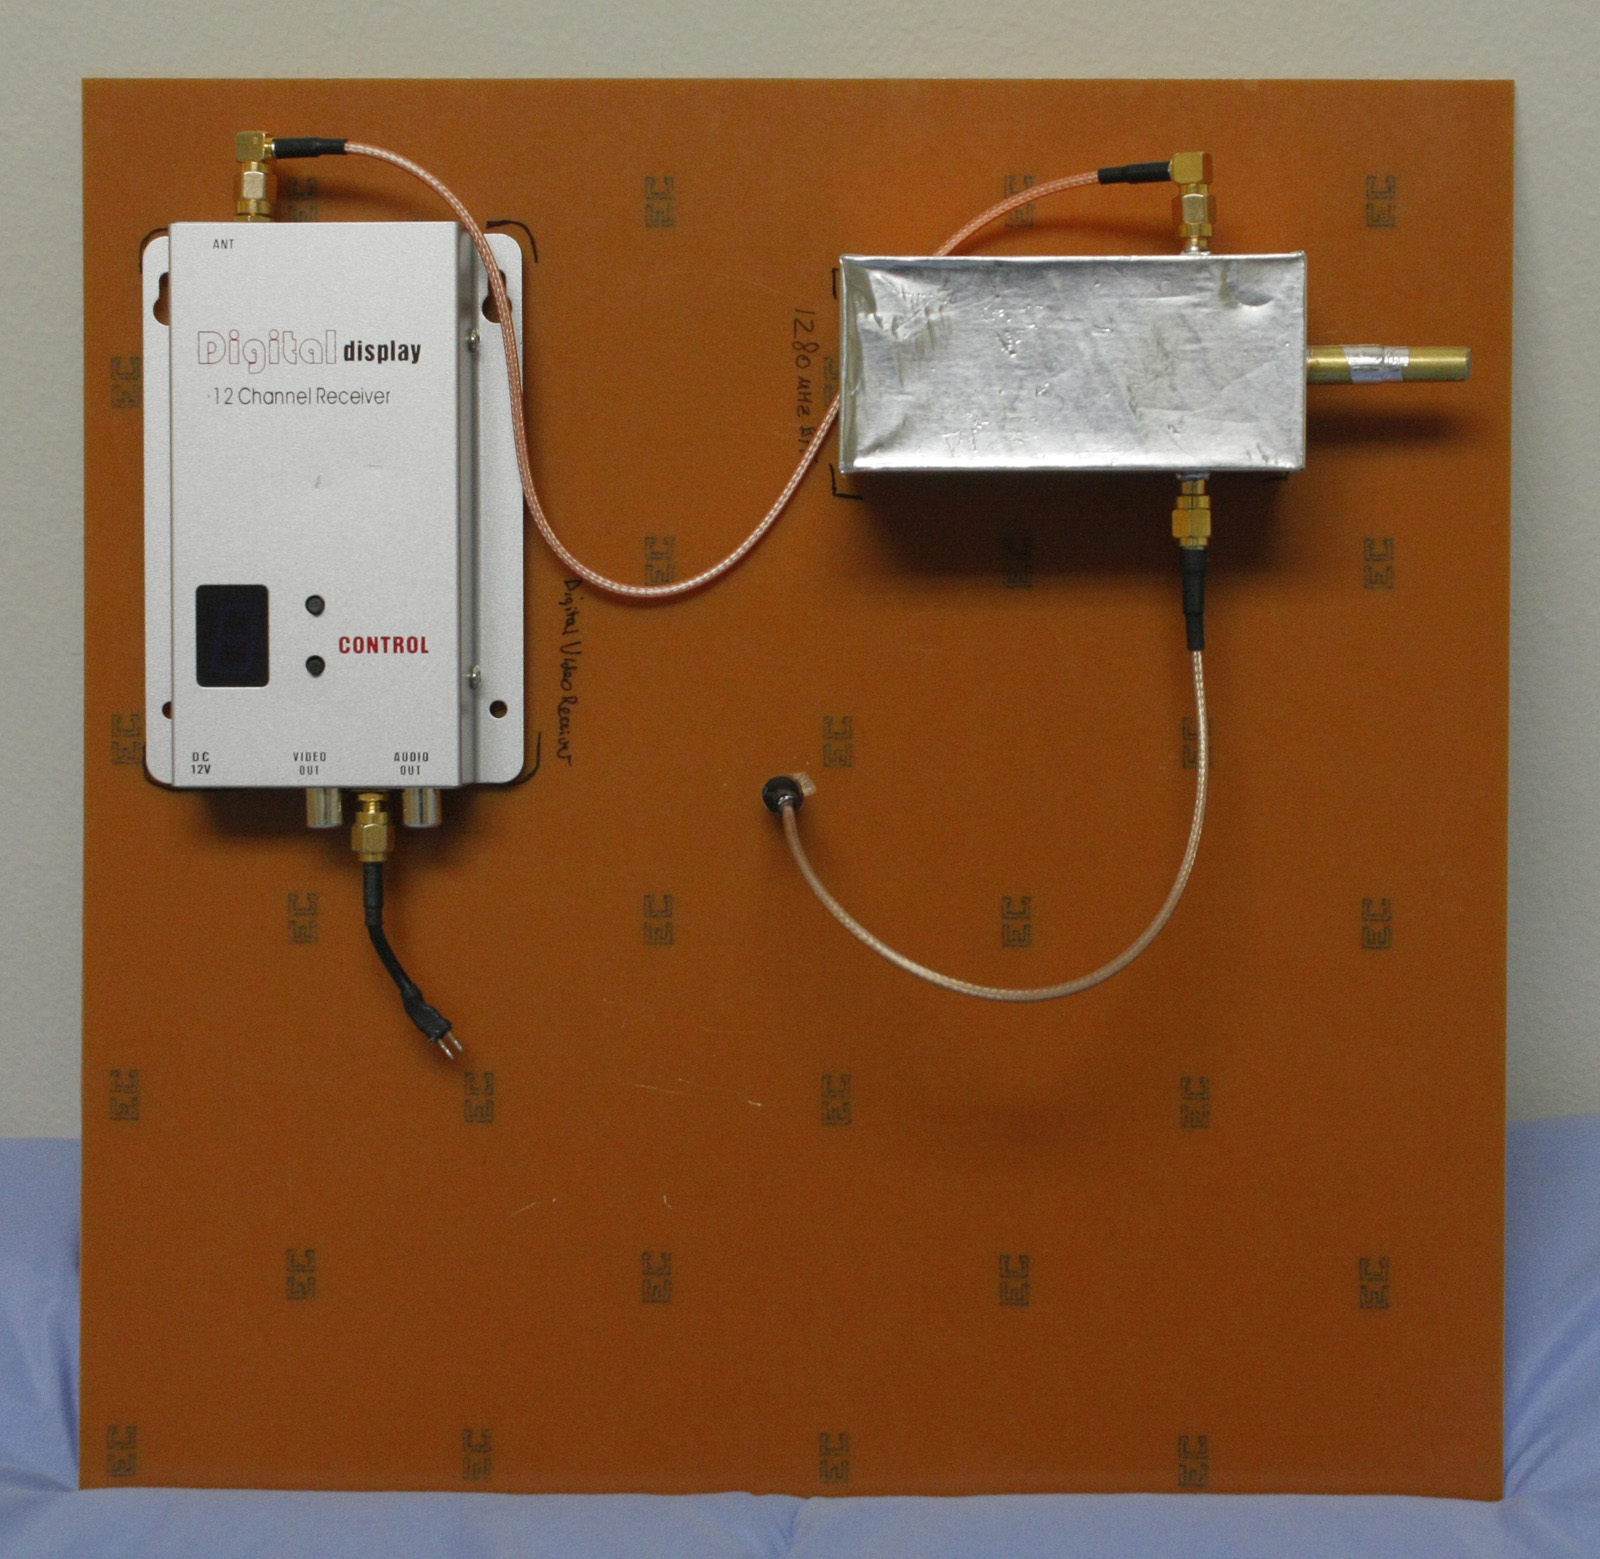 Back of crosshair antenna showing connected cavity filter and video receiver